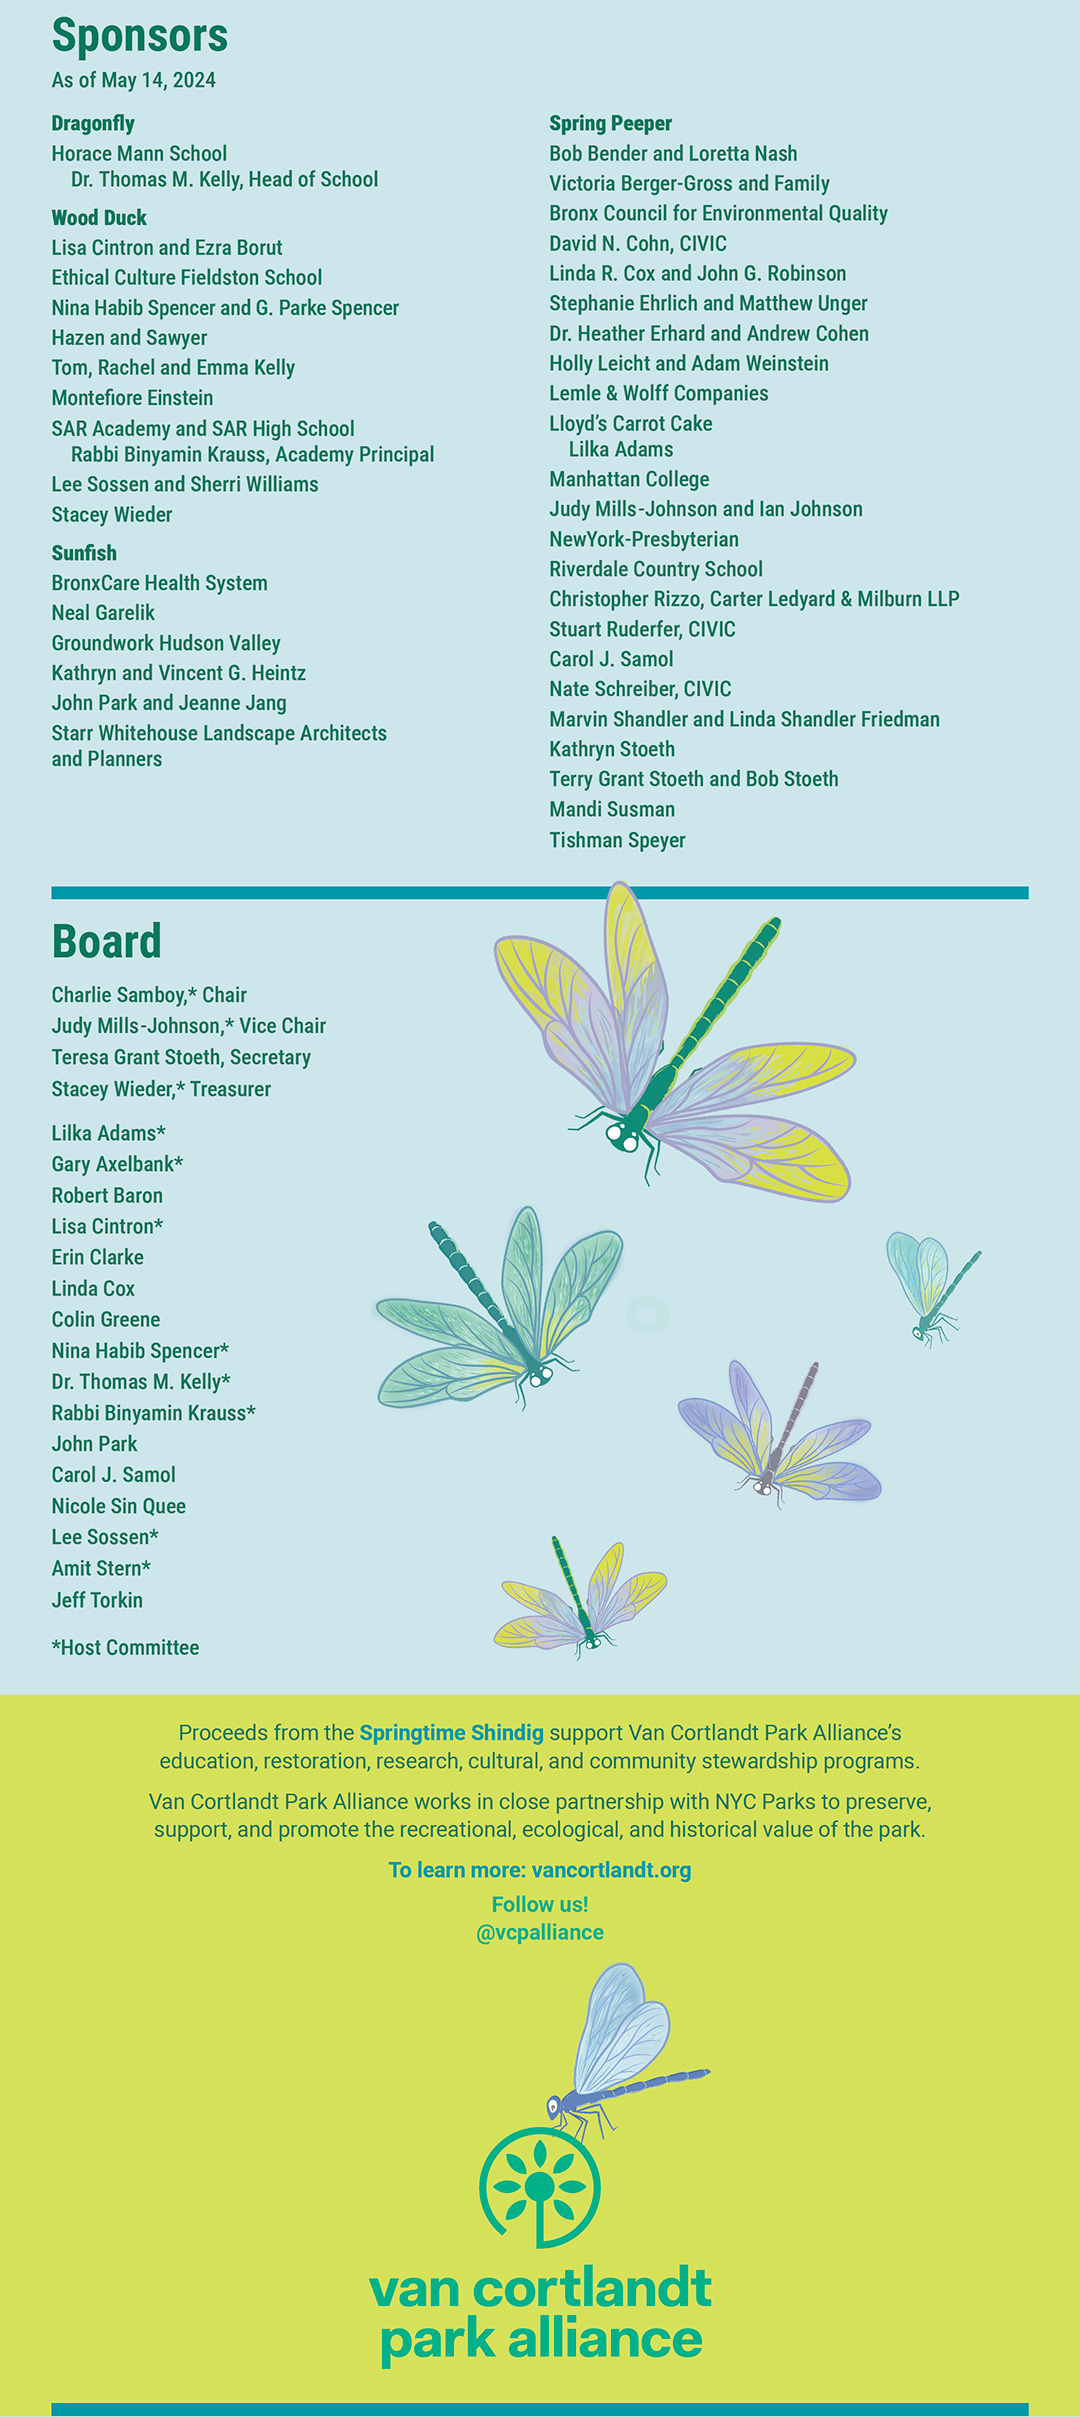 An image with butterflies listing sponsors and board members for an event